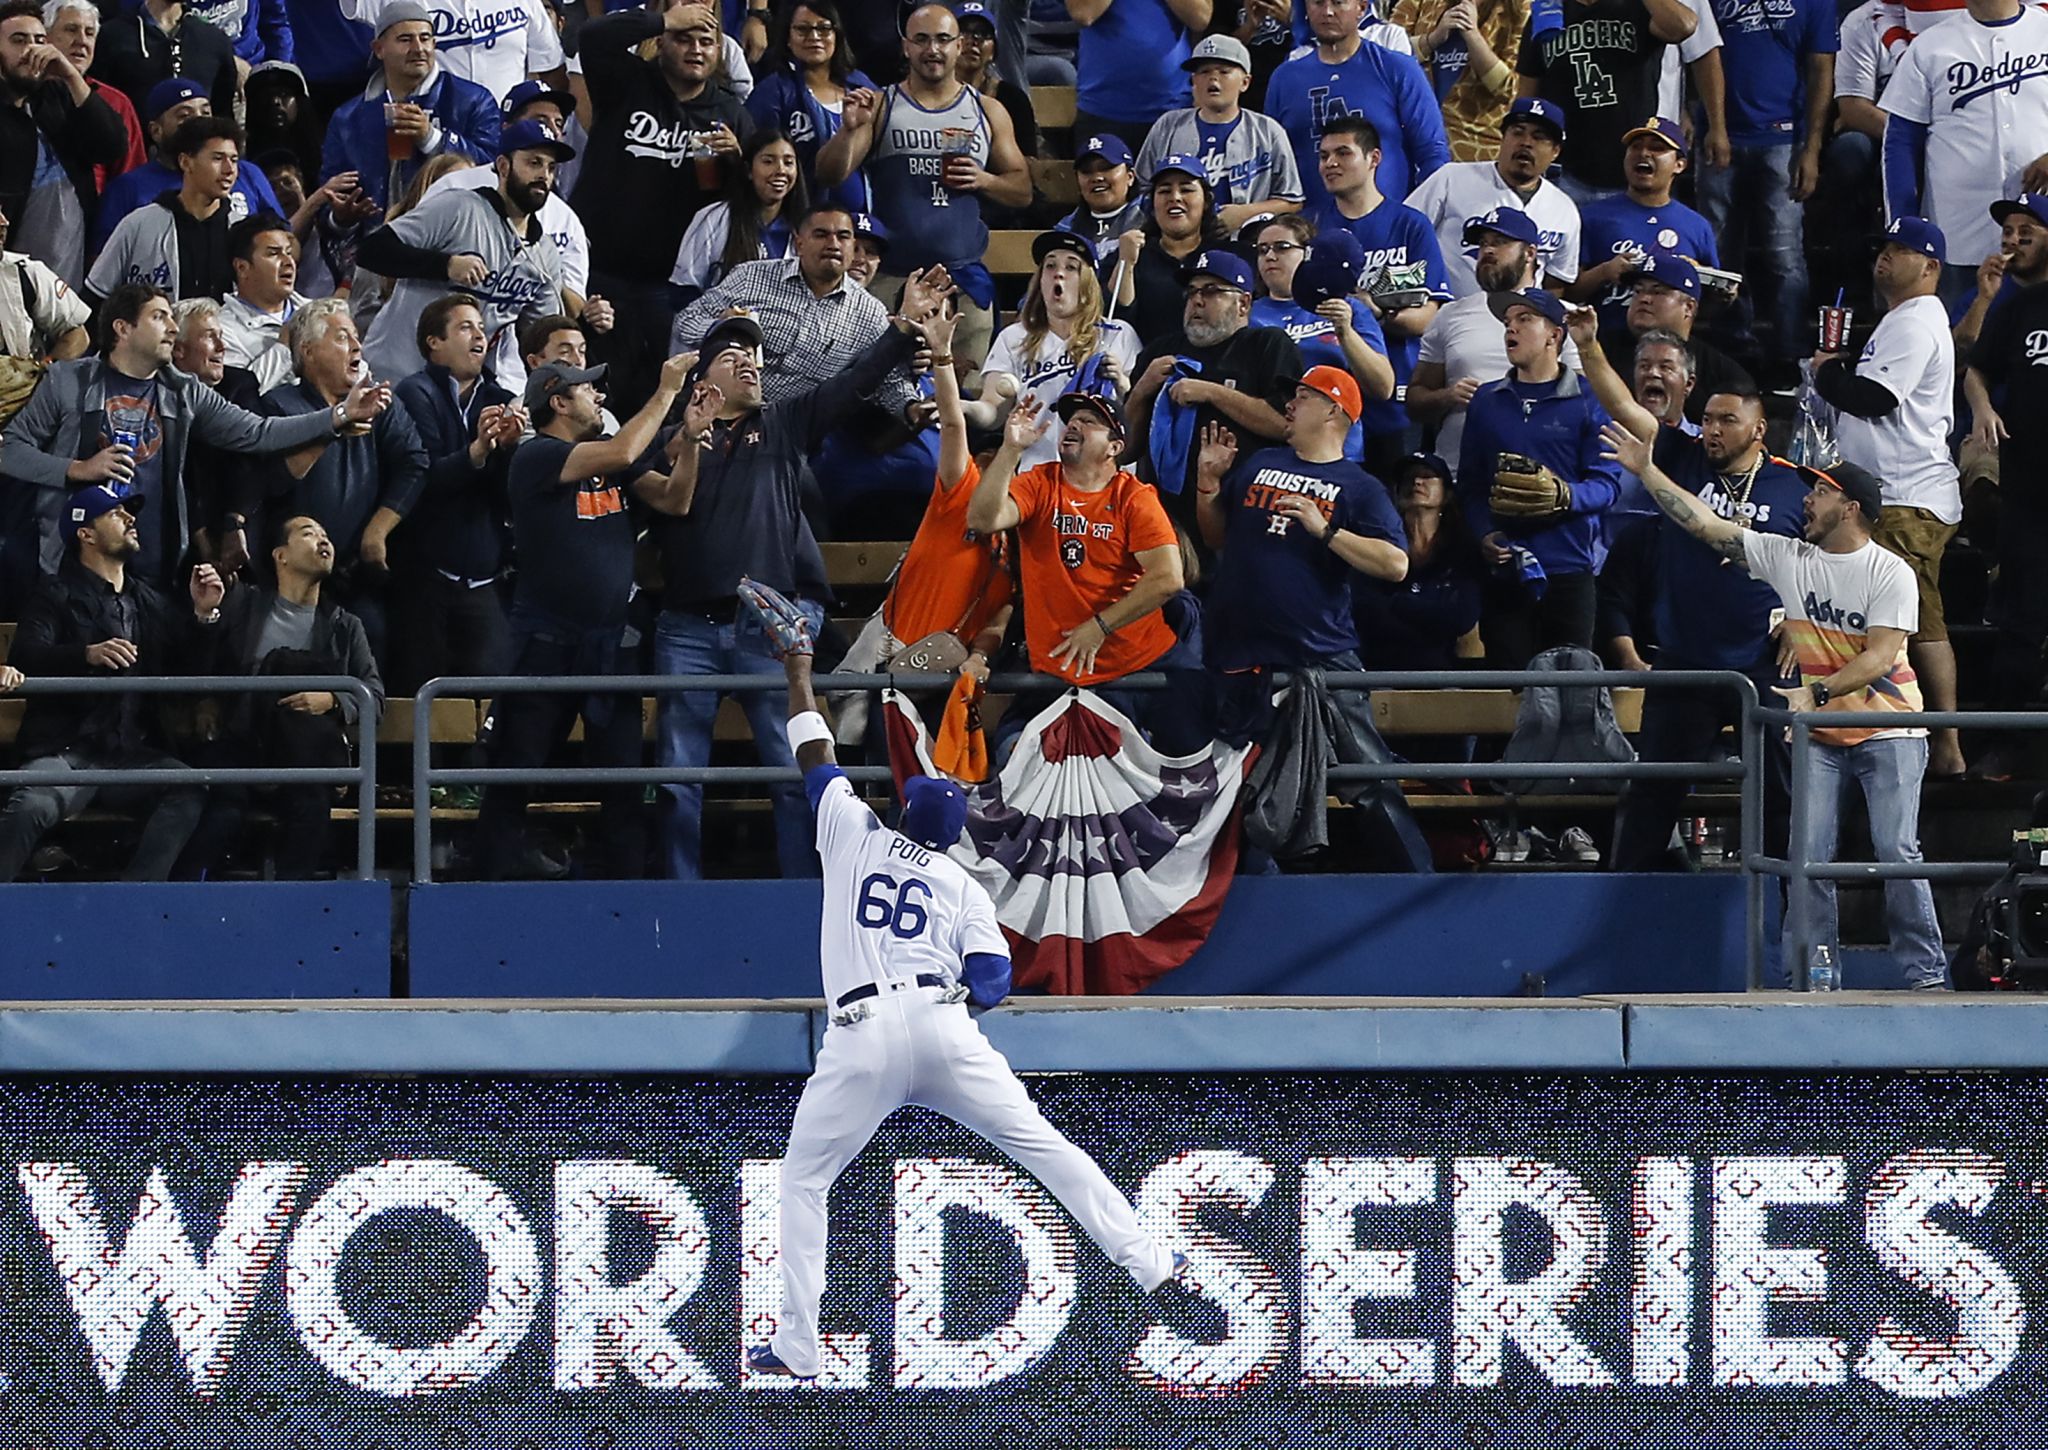 Dodgers World Series championship win attracts 12.6 million viewers